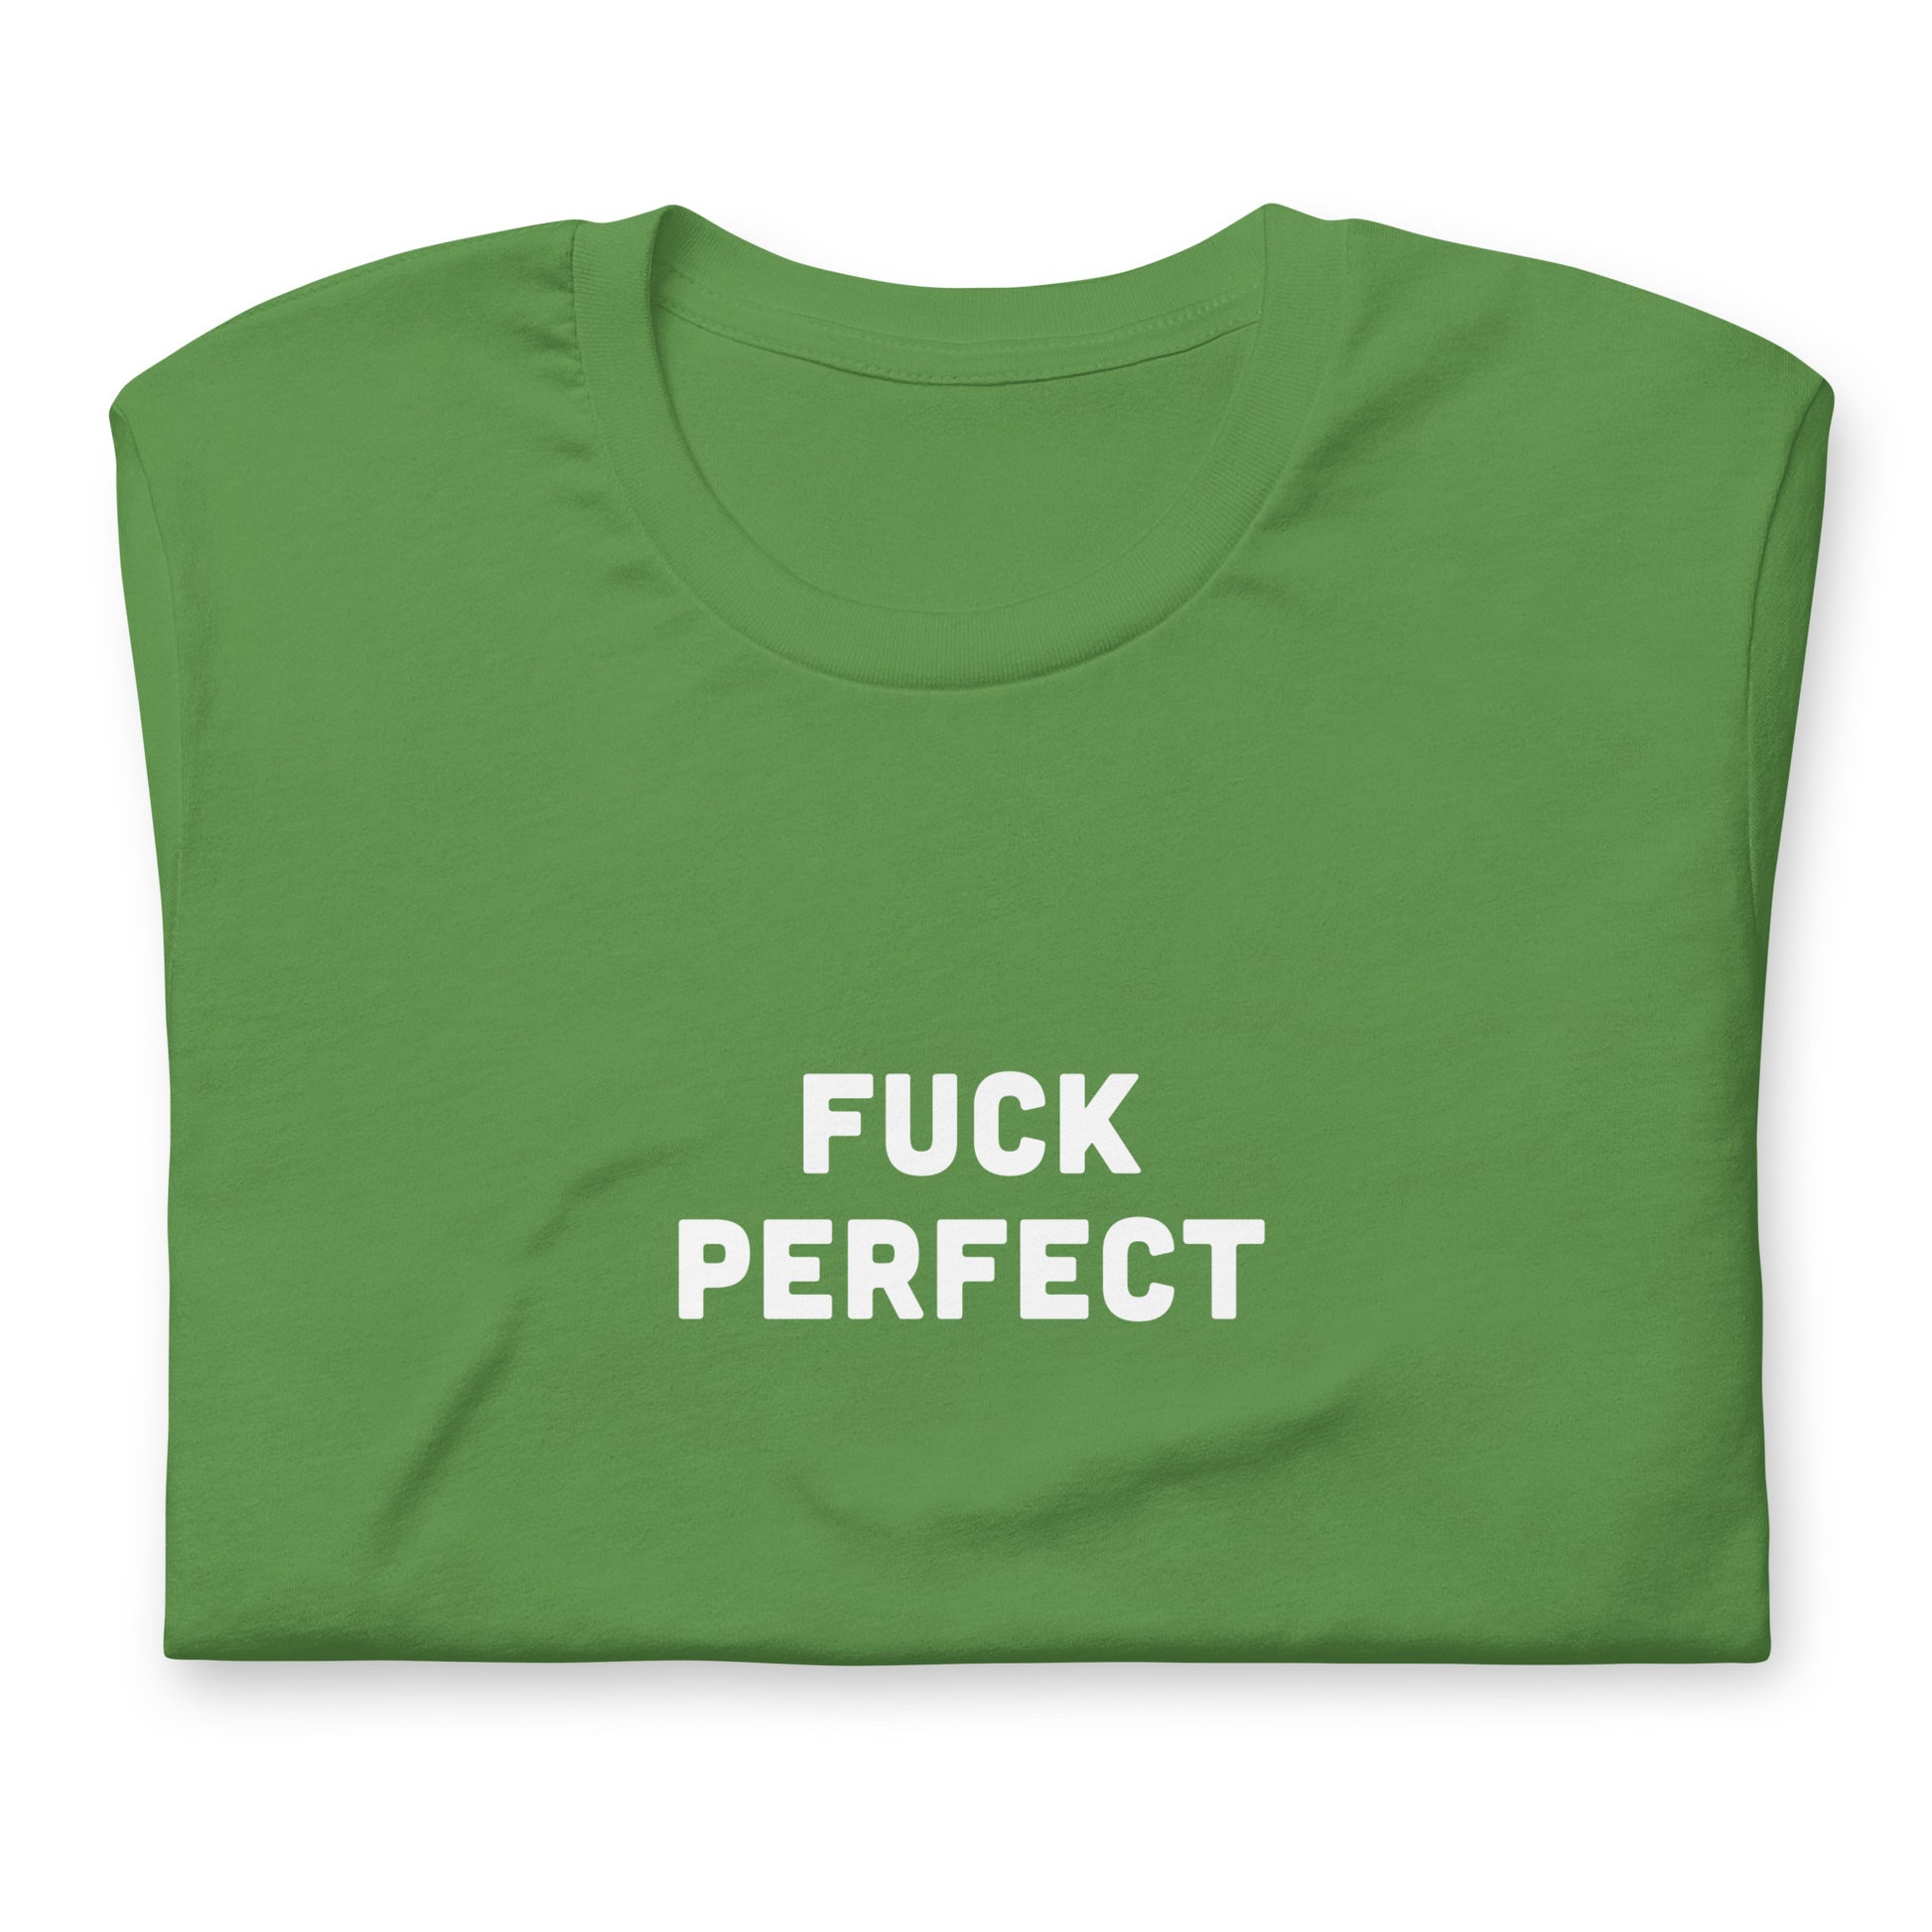 Fuck Perfect T-Shirt Size 2XL Color Navy